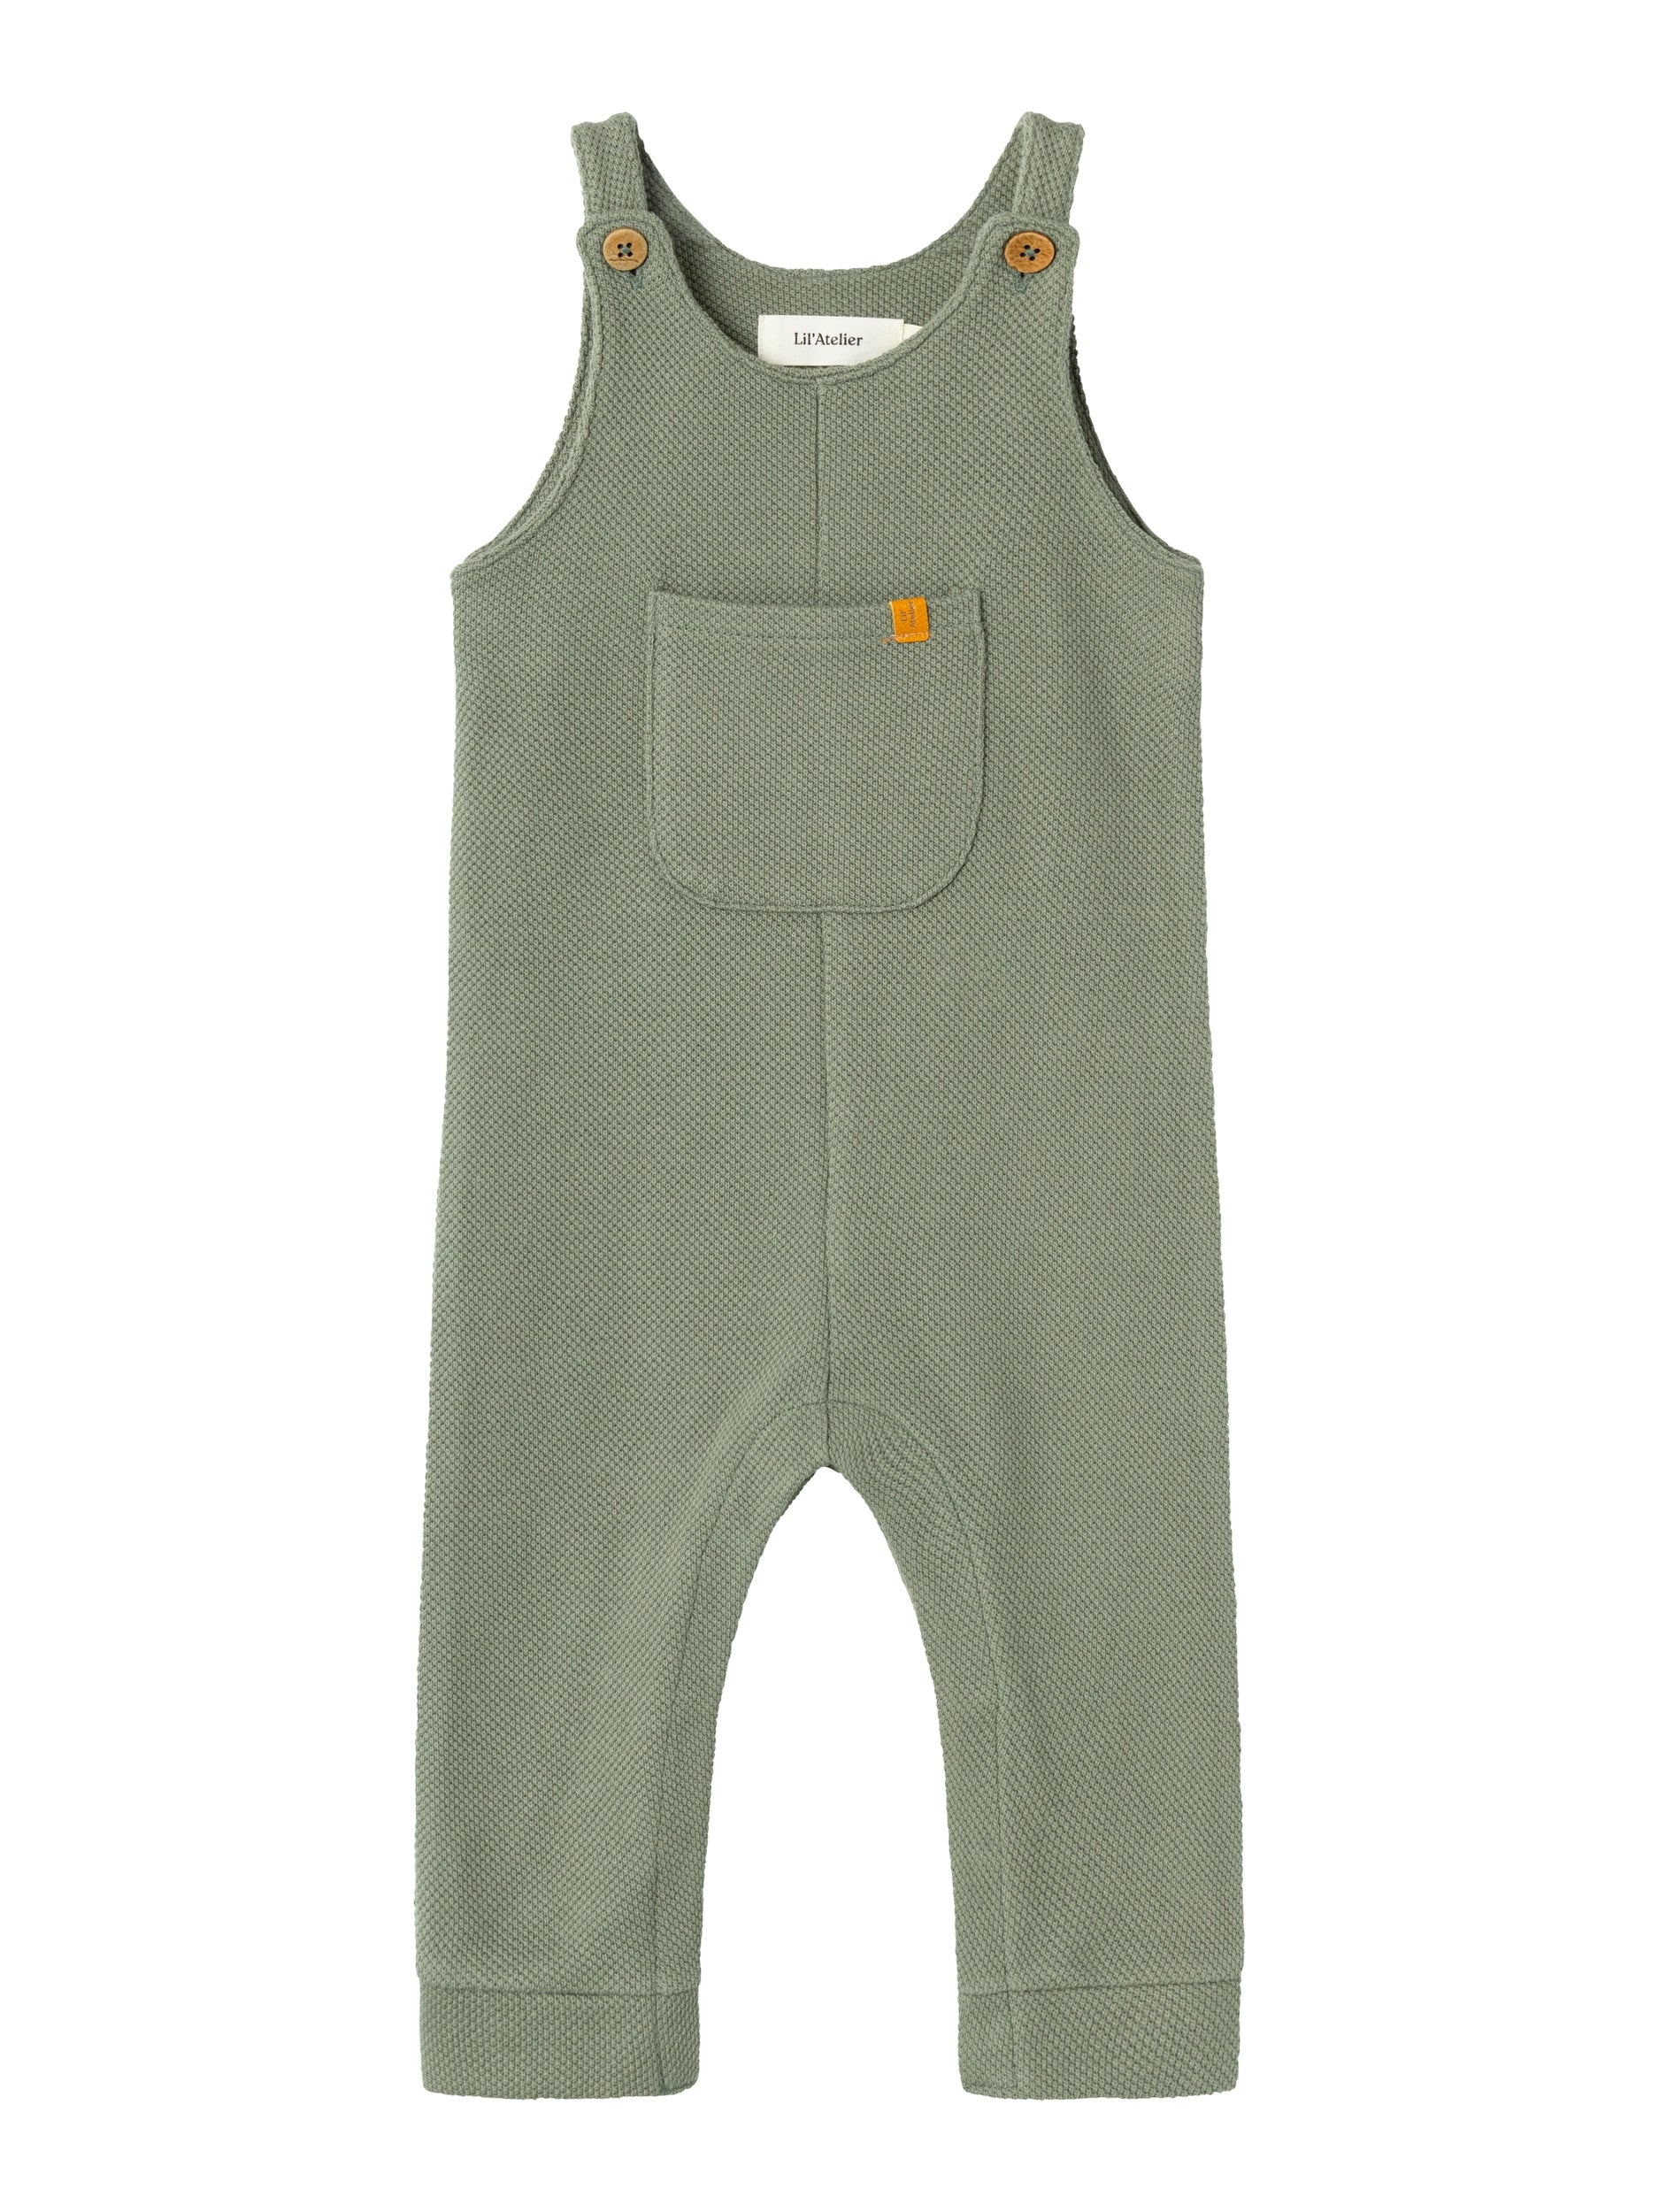 Billede af Lil Atelier Talio Sweat Overall - Agave Green - 56 cm